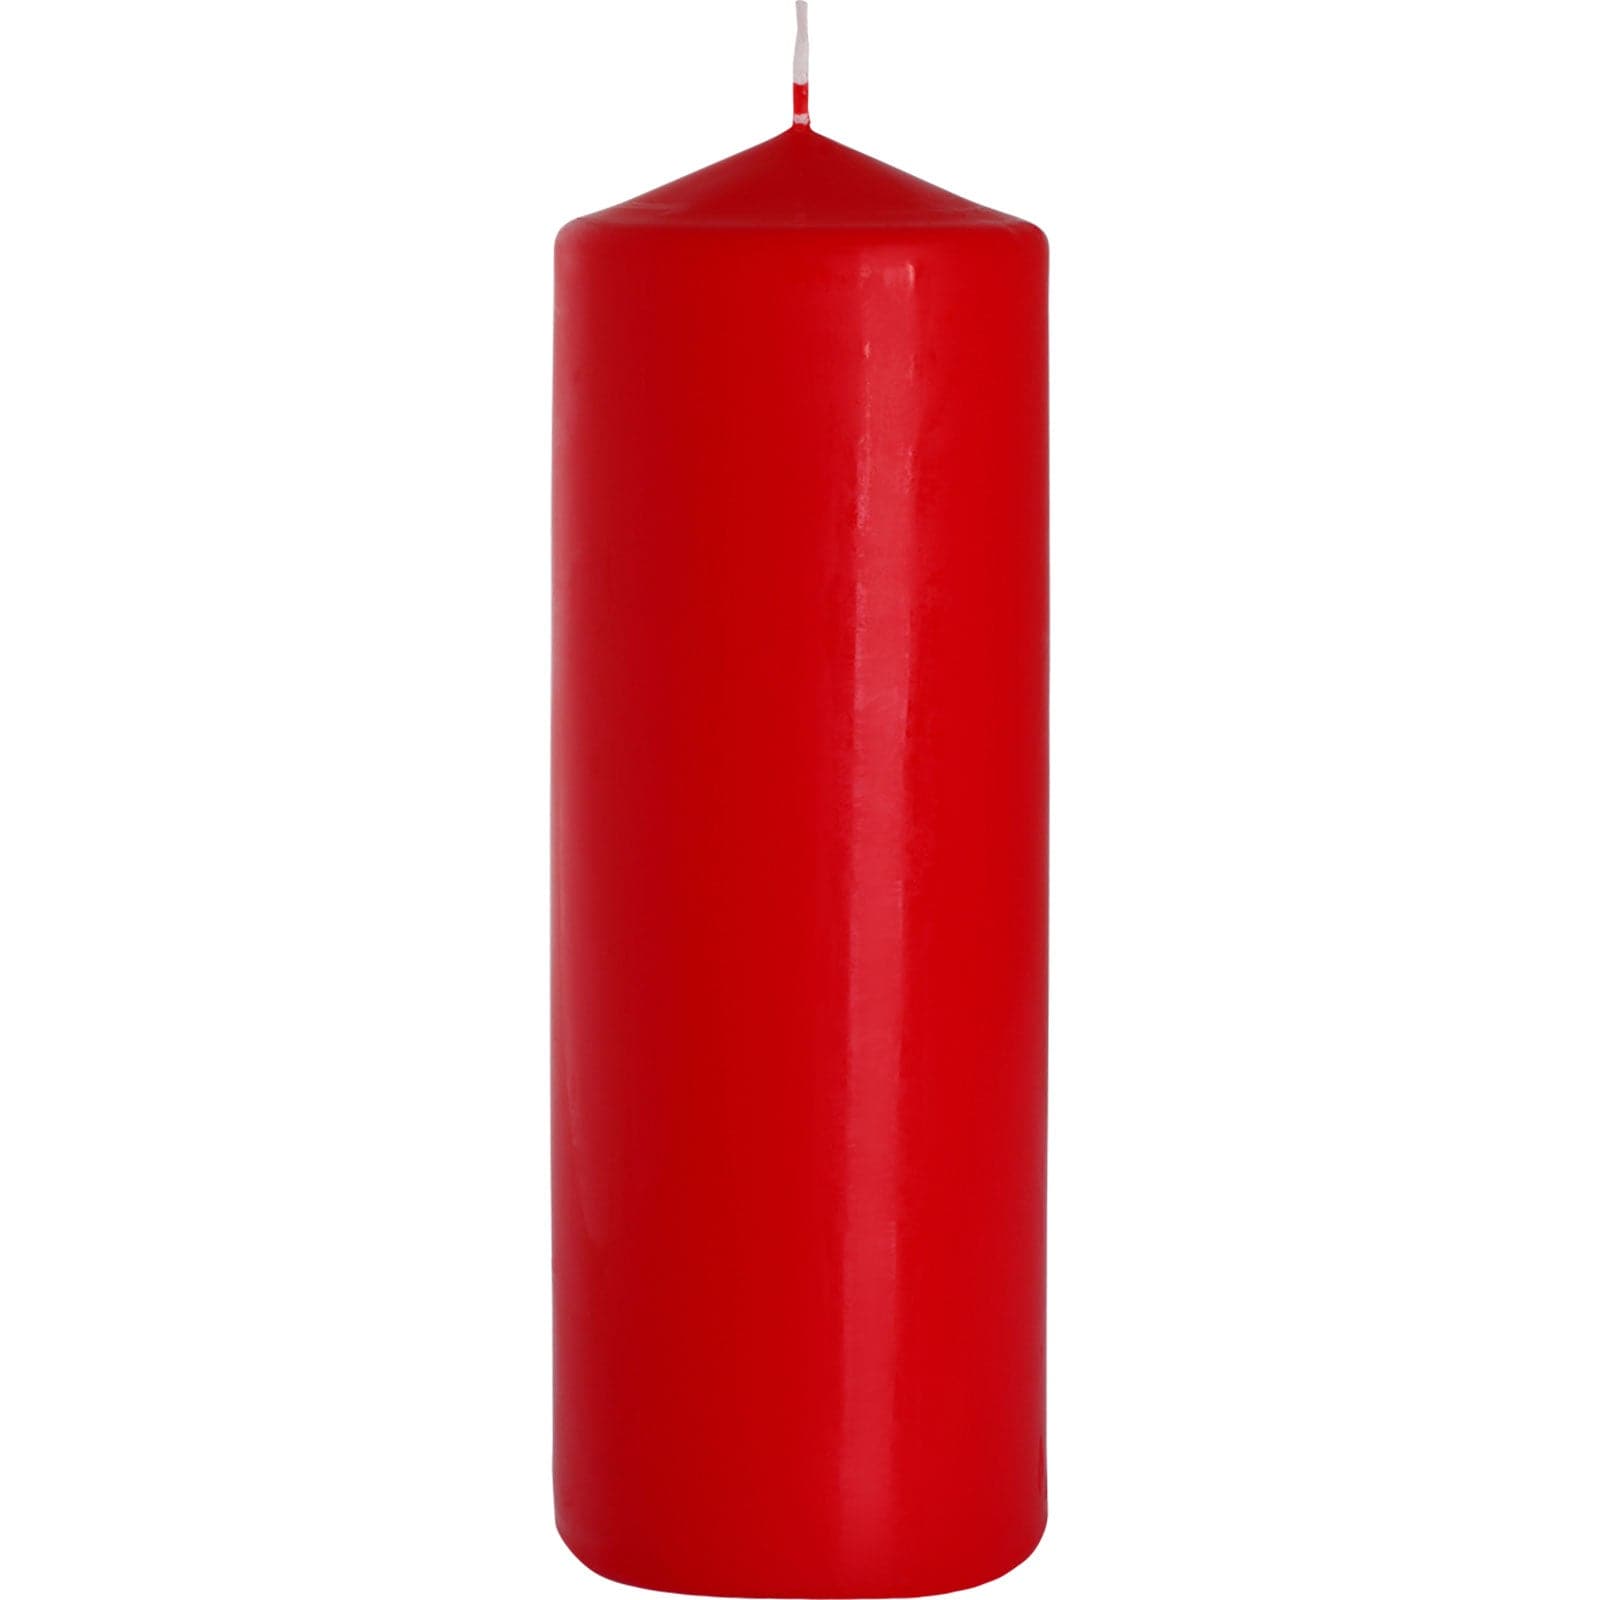 Single Pillar Candle 80x250mm - Red